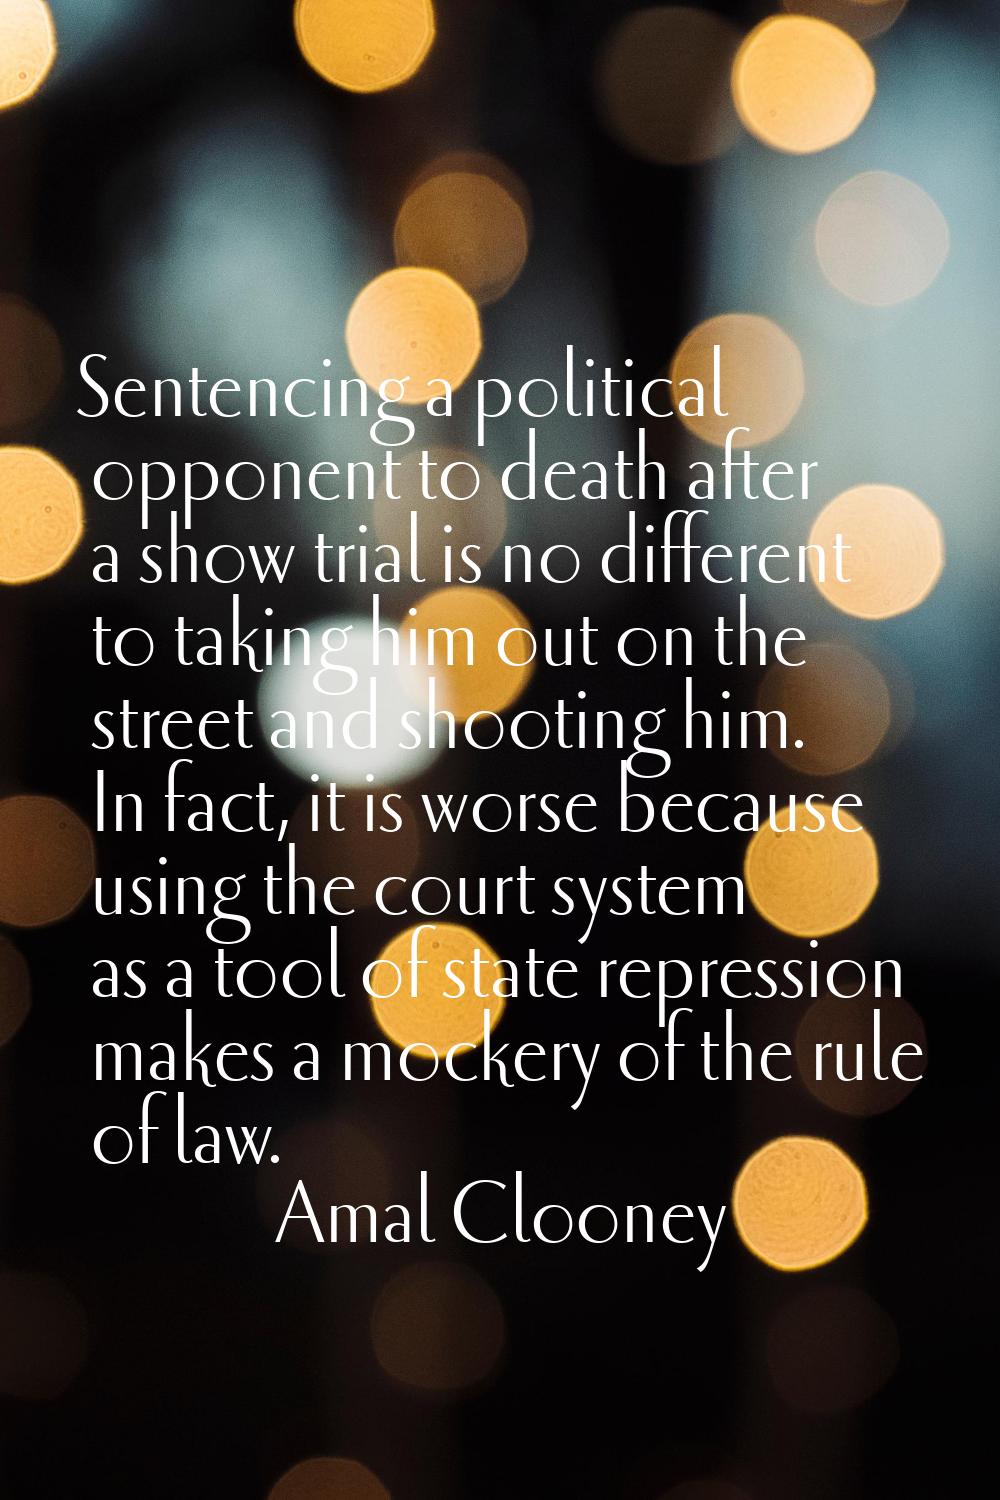 Sentencing a political opponent to death after a show trial is no different to taking him out on th